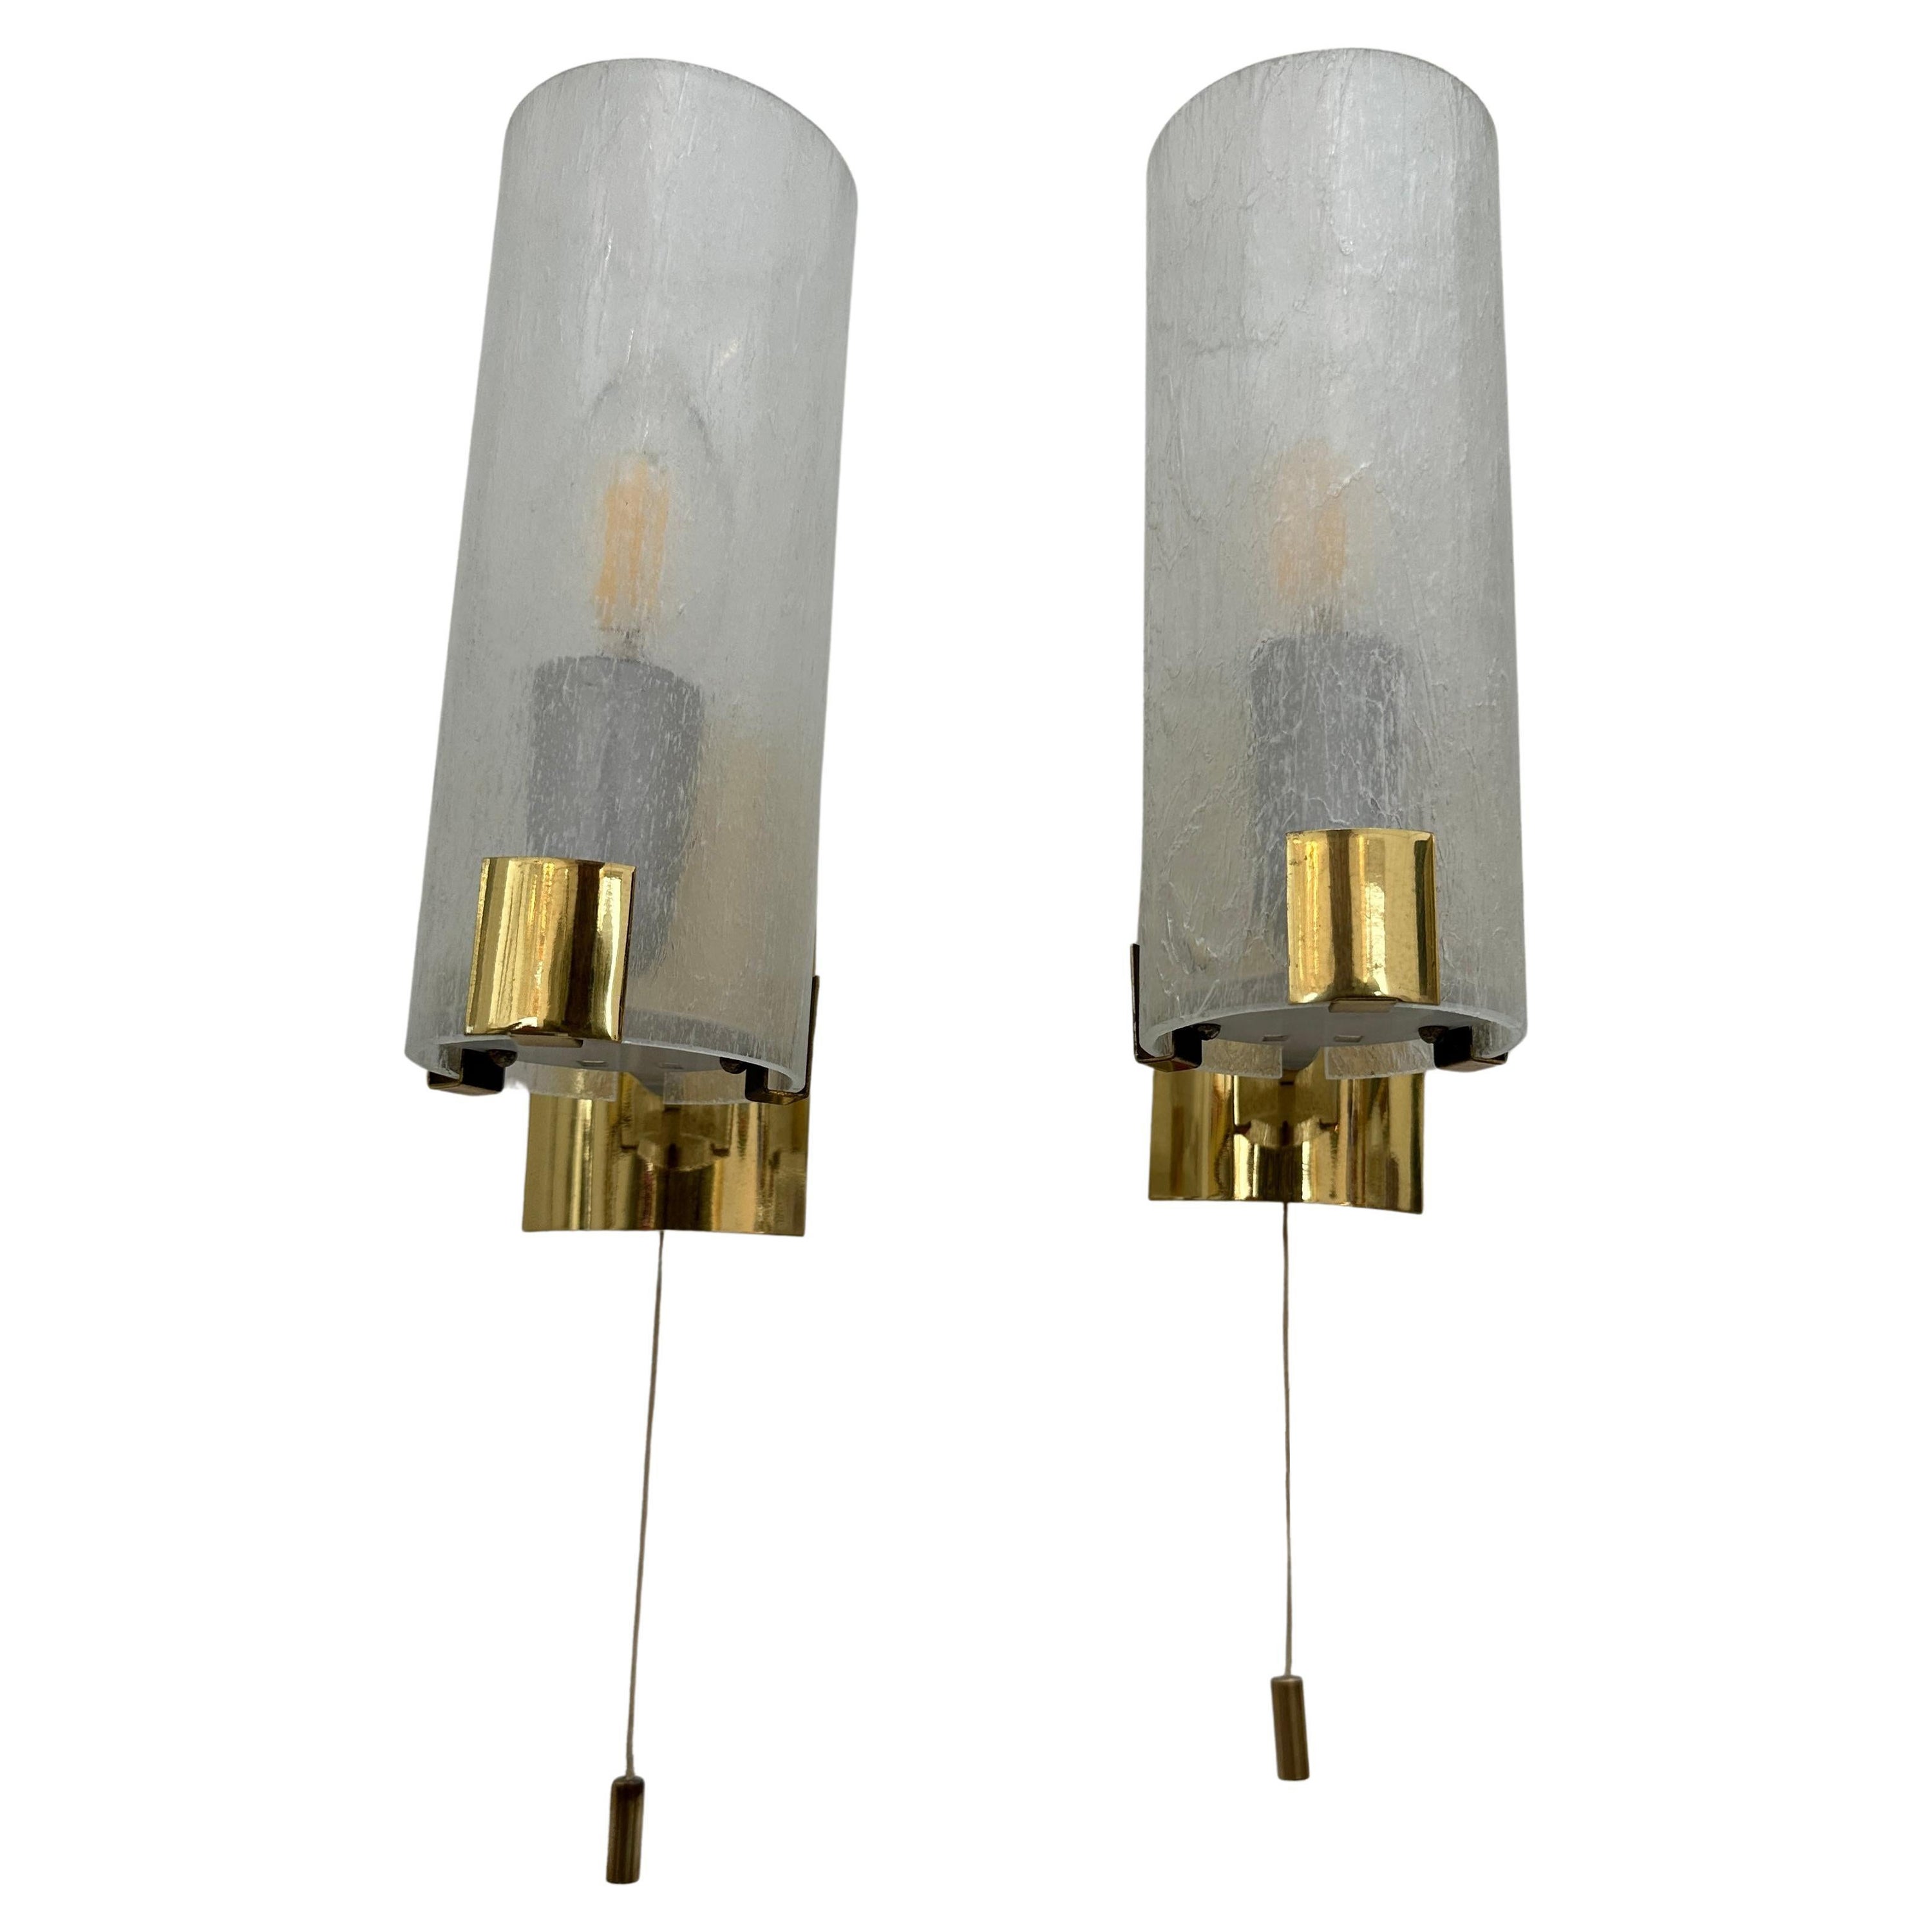 Pair 1970s German Tubular Frosted Glass Wall Lights Sconces Doria Leuchten Style For Sale